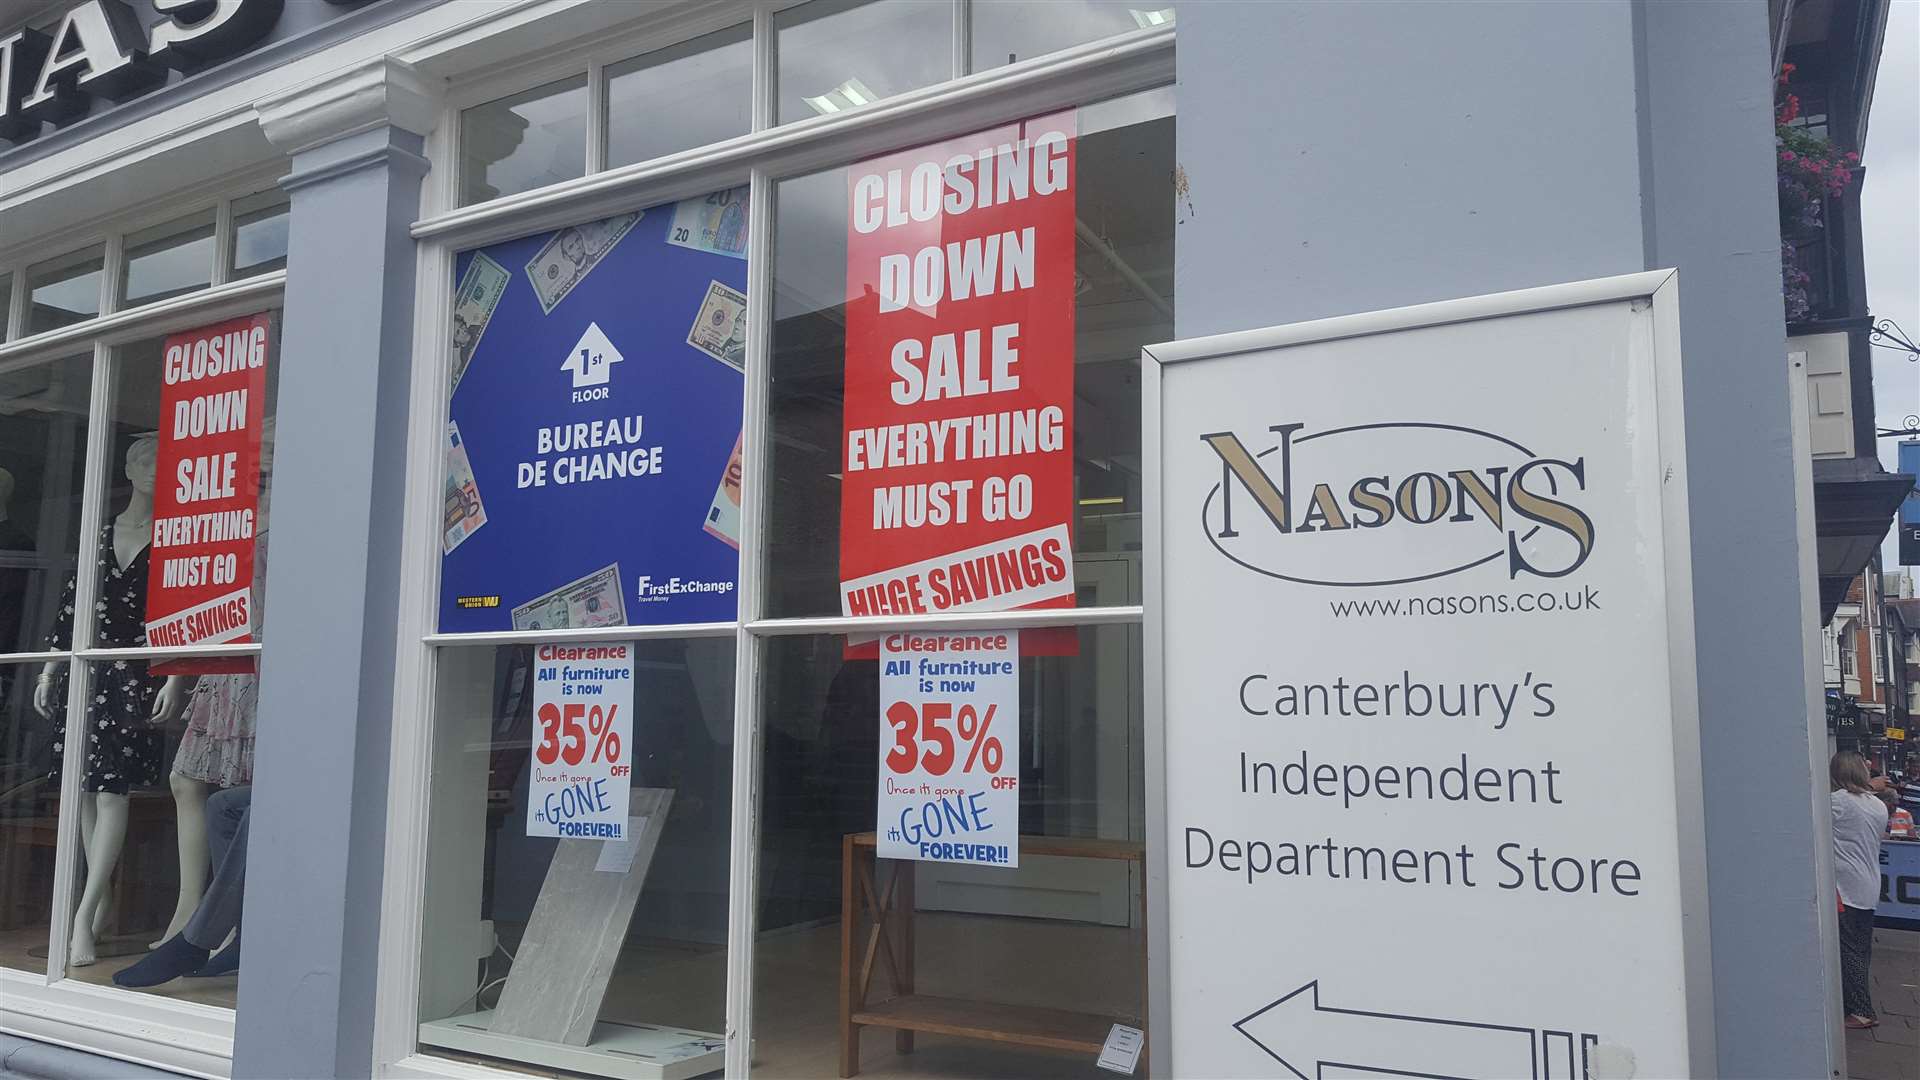 Nasons has now closed down